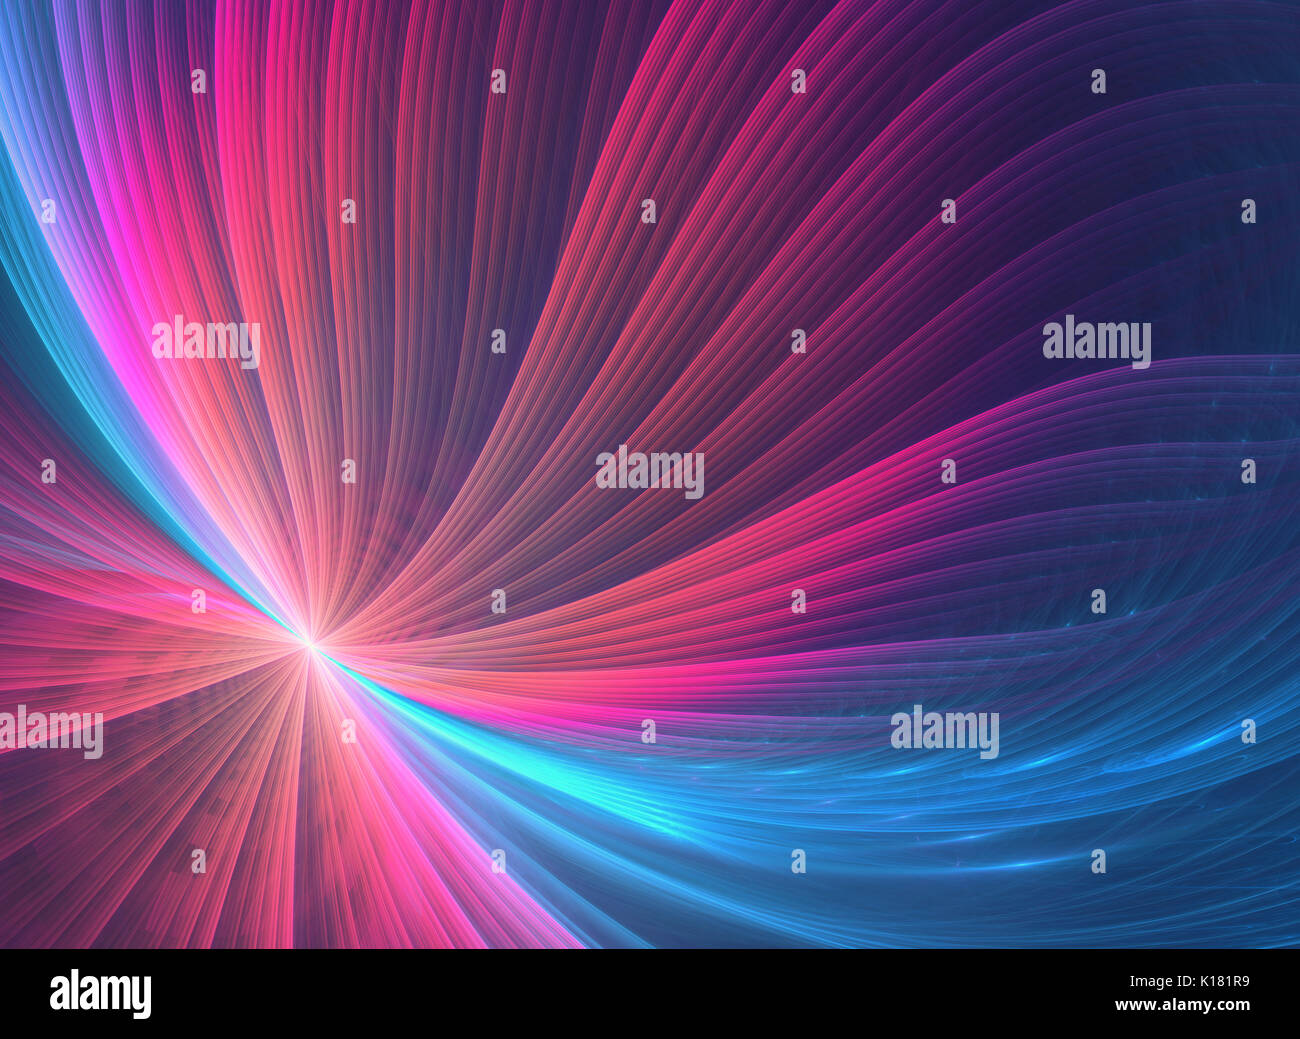 Glow fractal with a pink swirl pattern. A digital image is rendered on a computer. Conceptual scientific image. Stock Photo